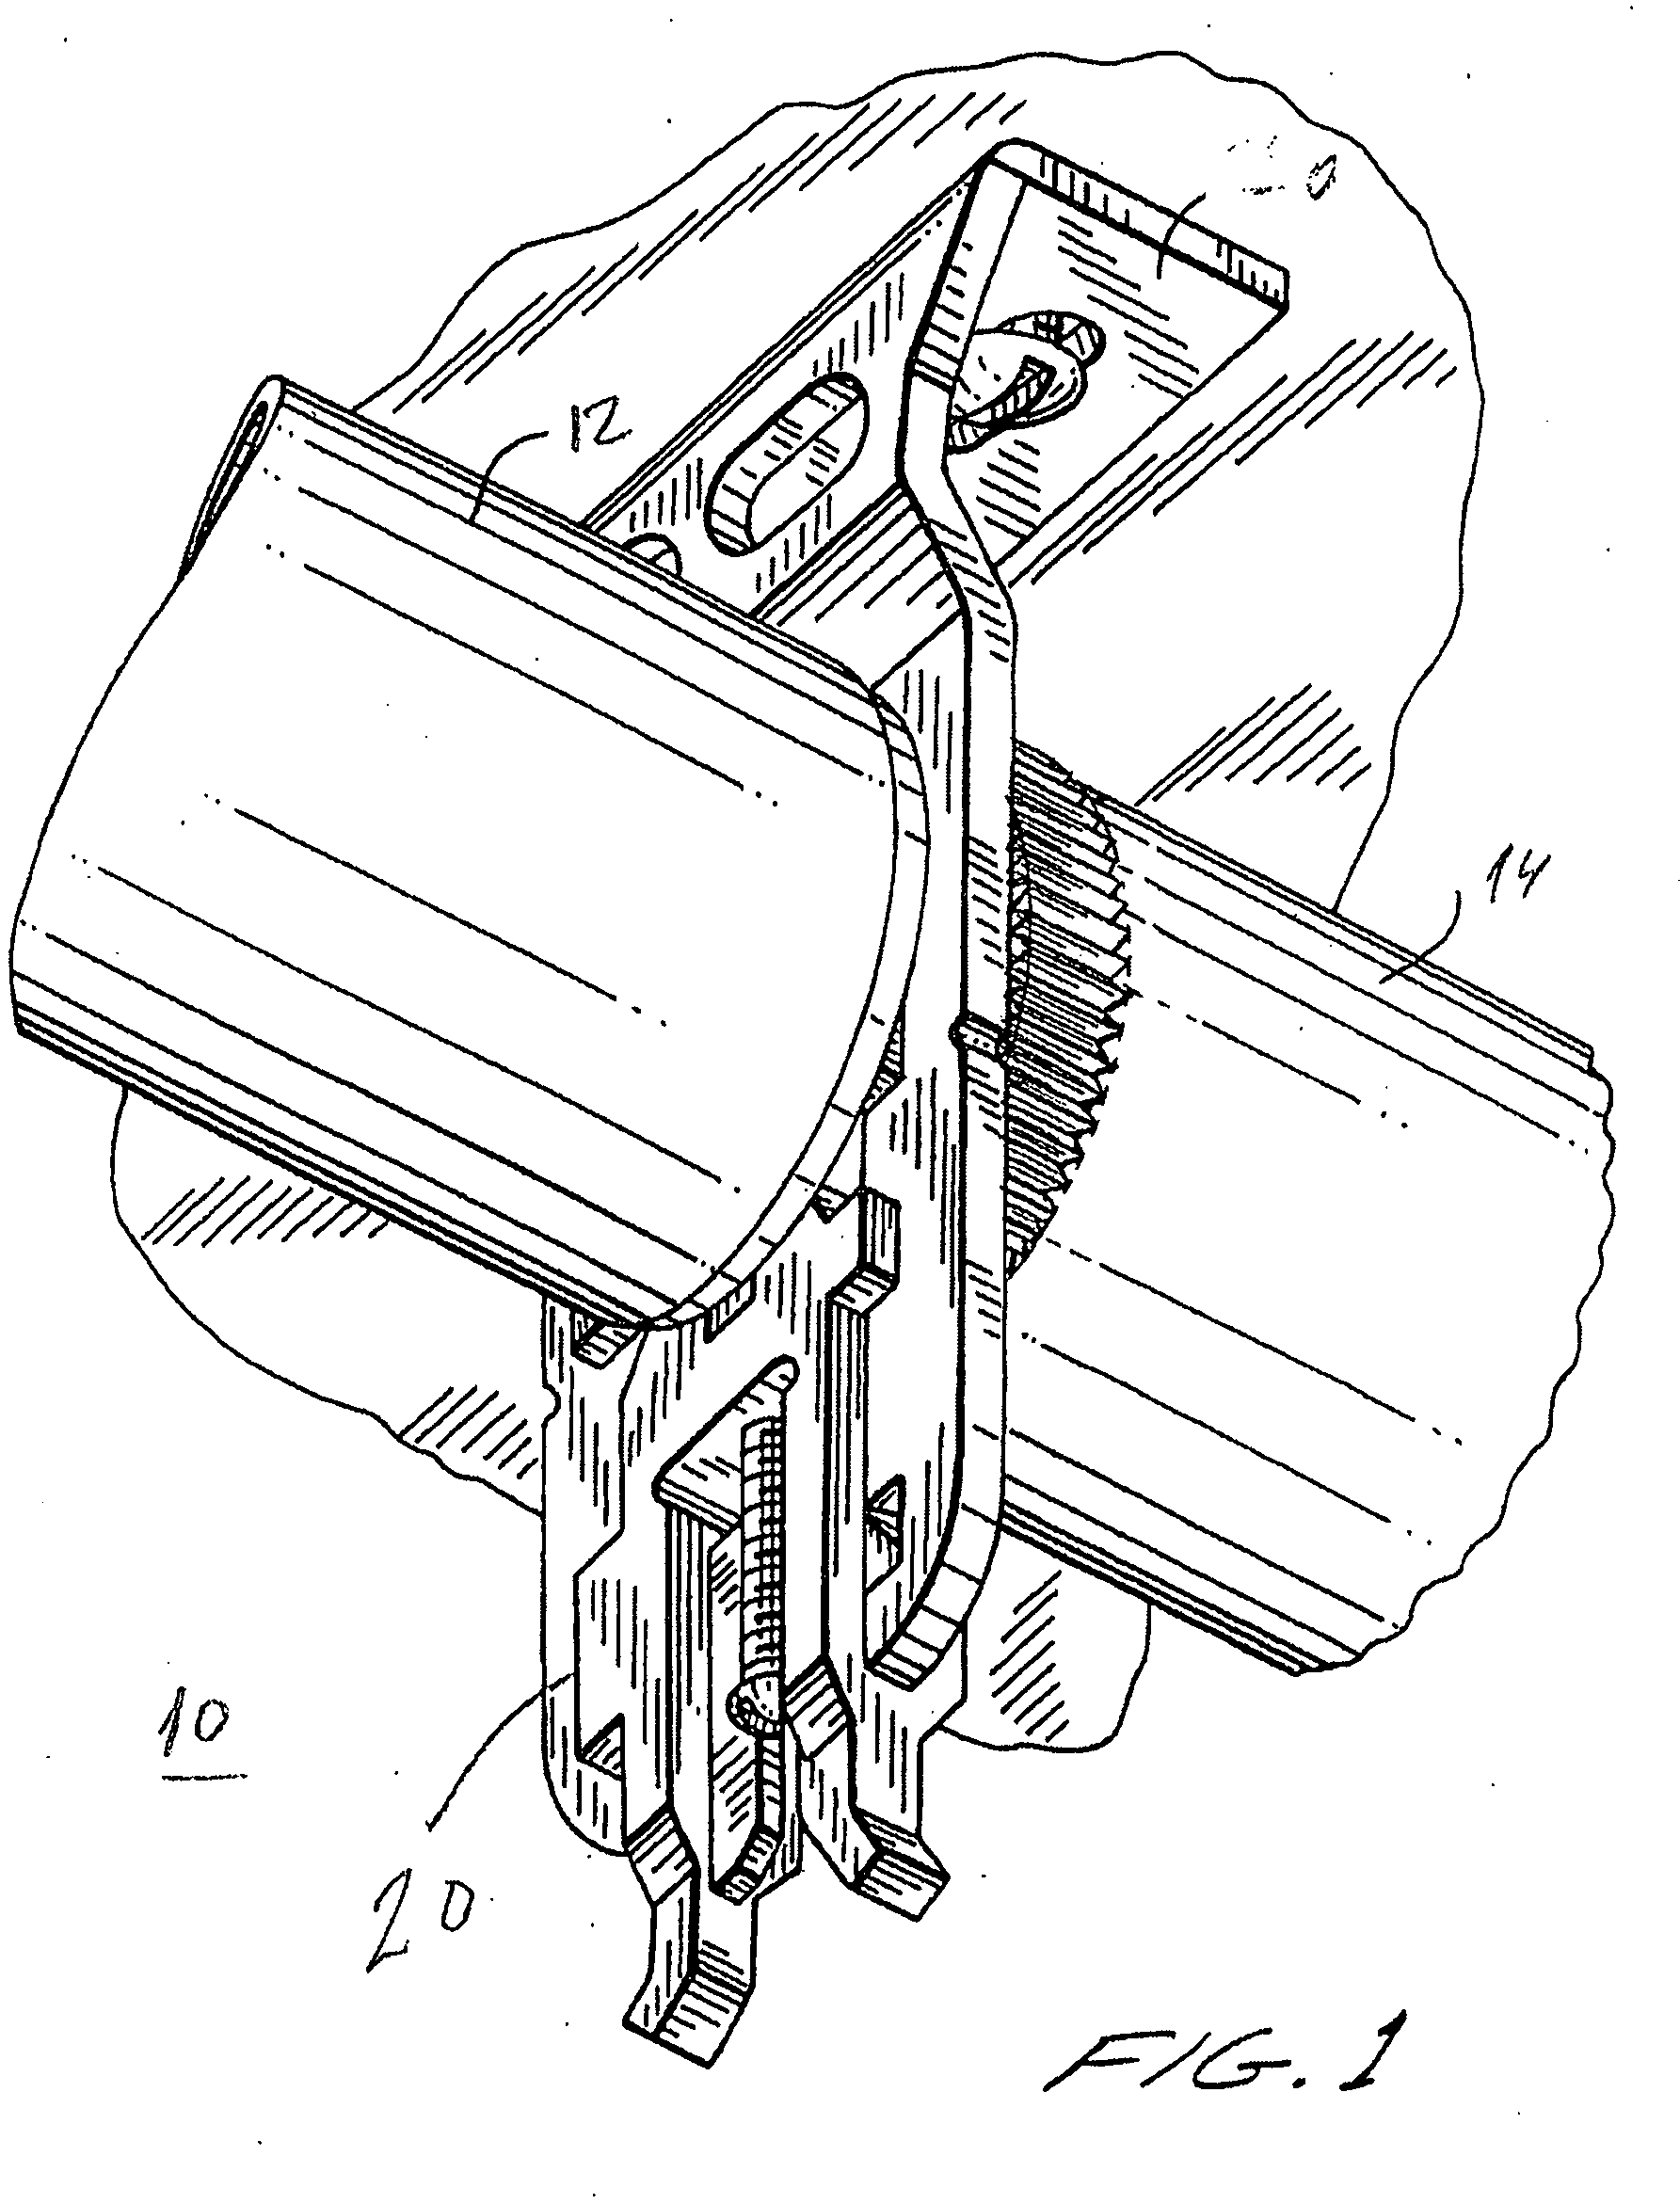 Multi-section window dressing with coupling clutch